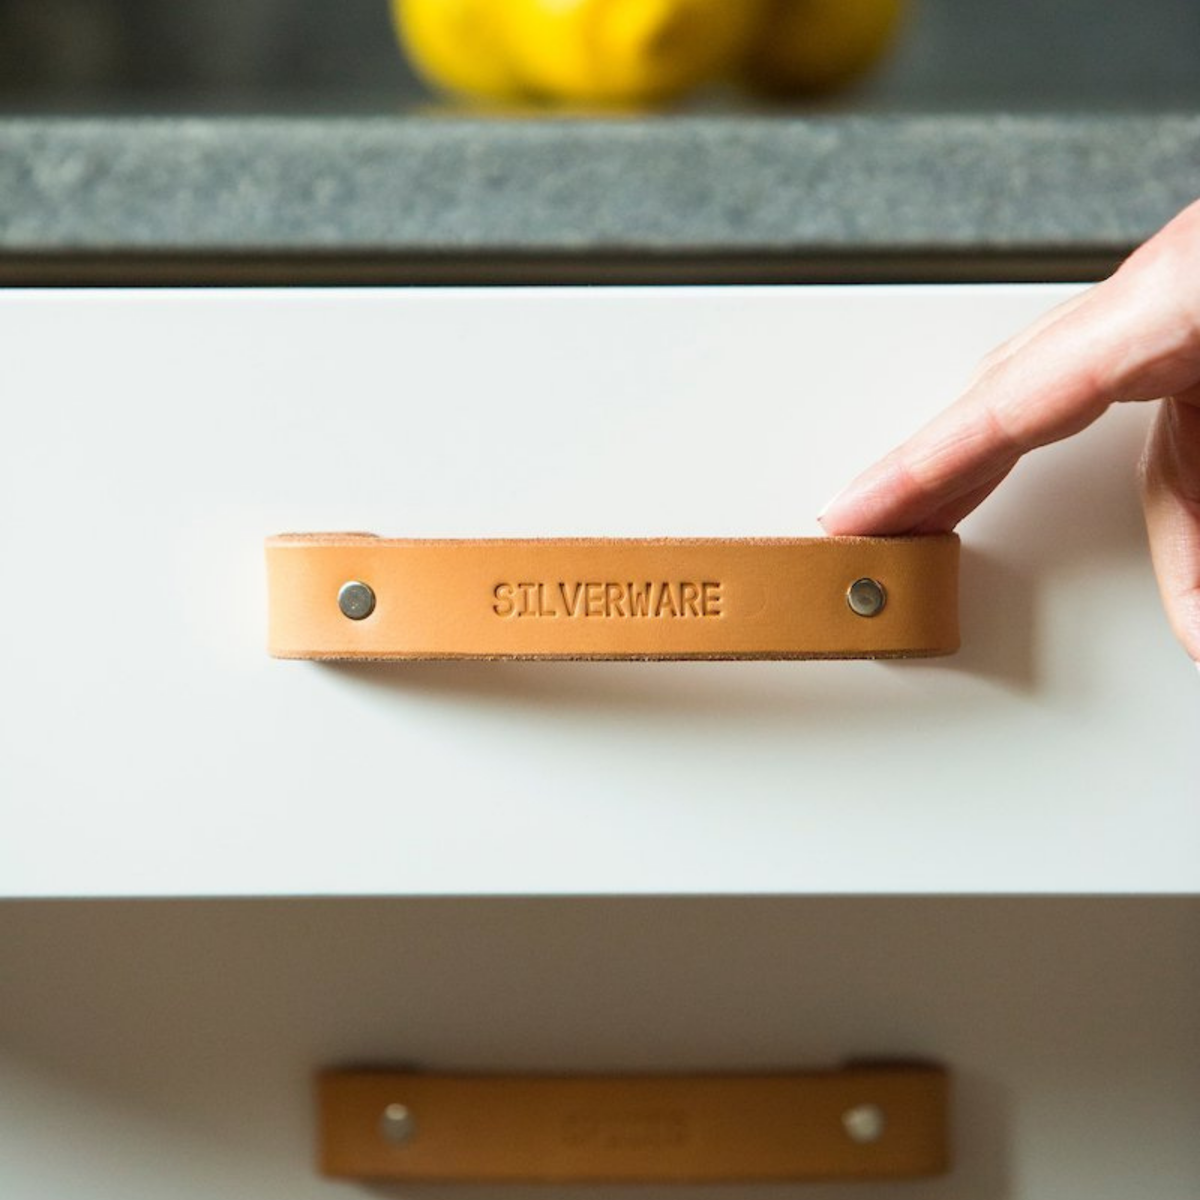 Close-up photo of a Natural un-dyed vegetable-tanned leather Tilikum handle with a custom message debossed into the surface identifying it as the silverware drawer. 